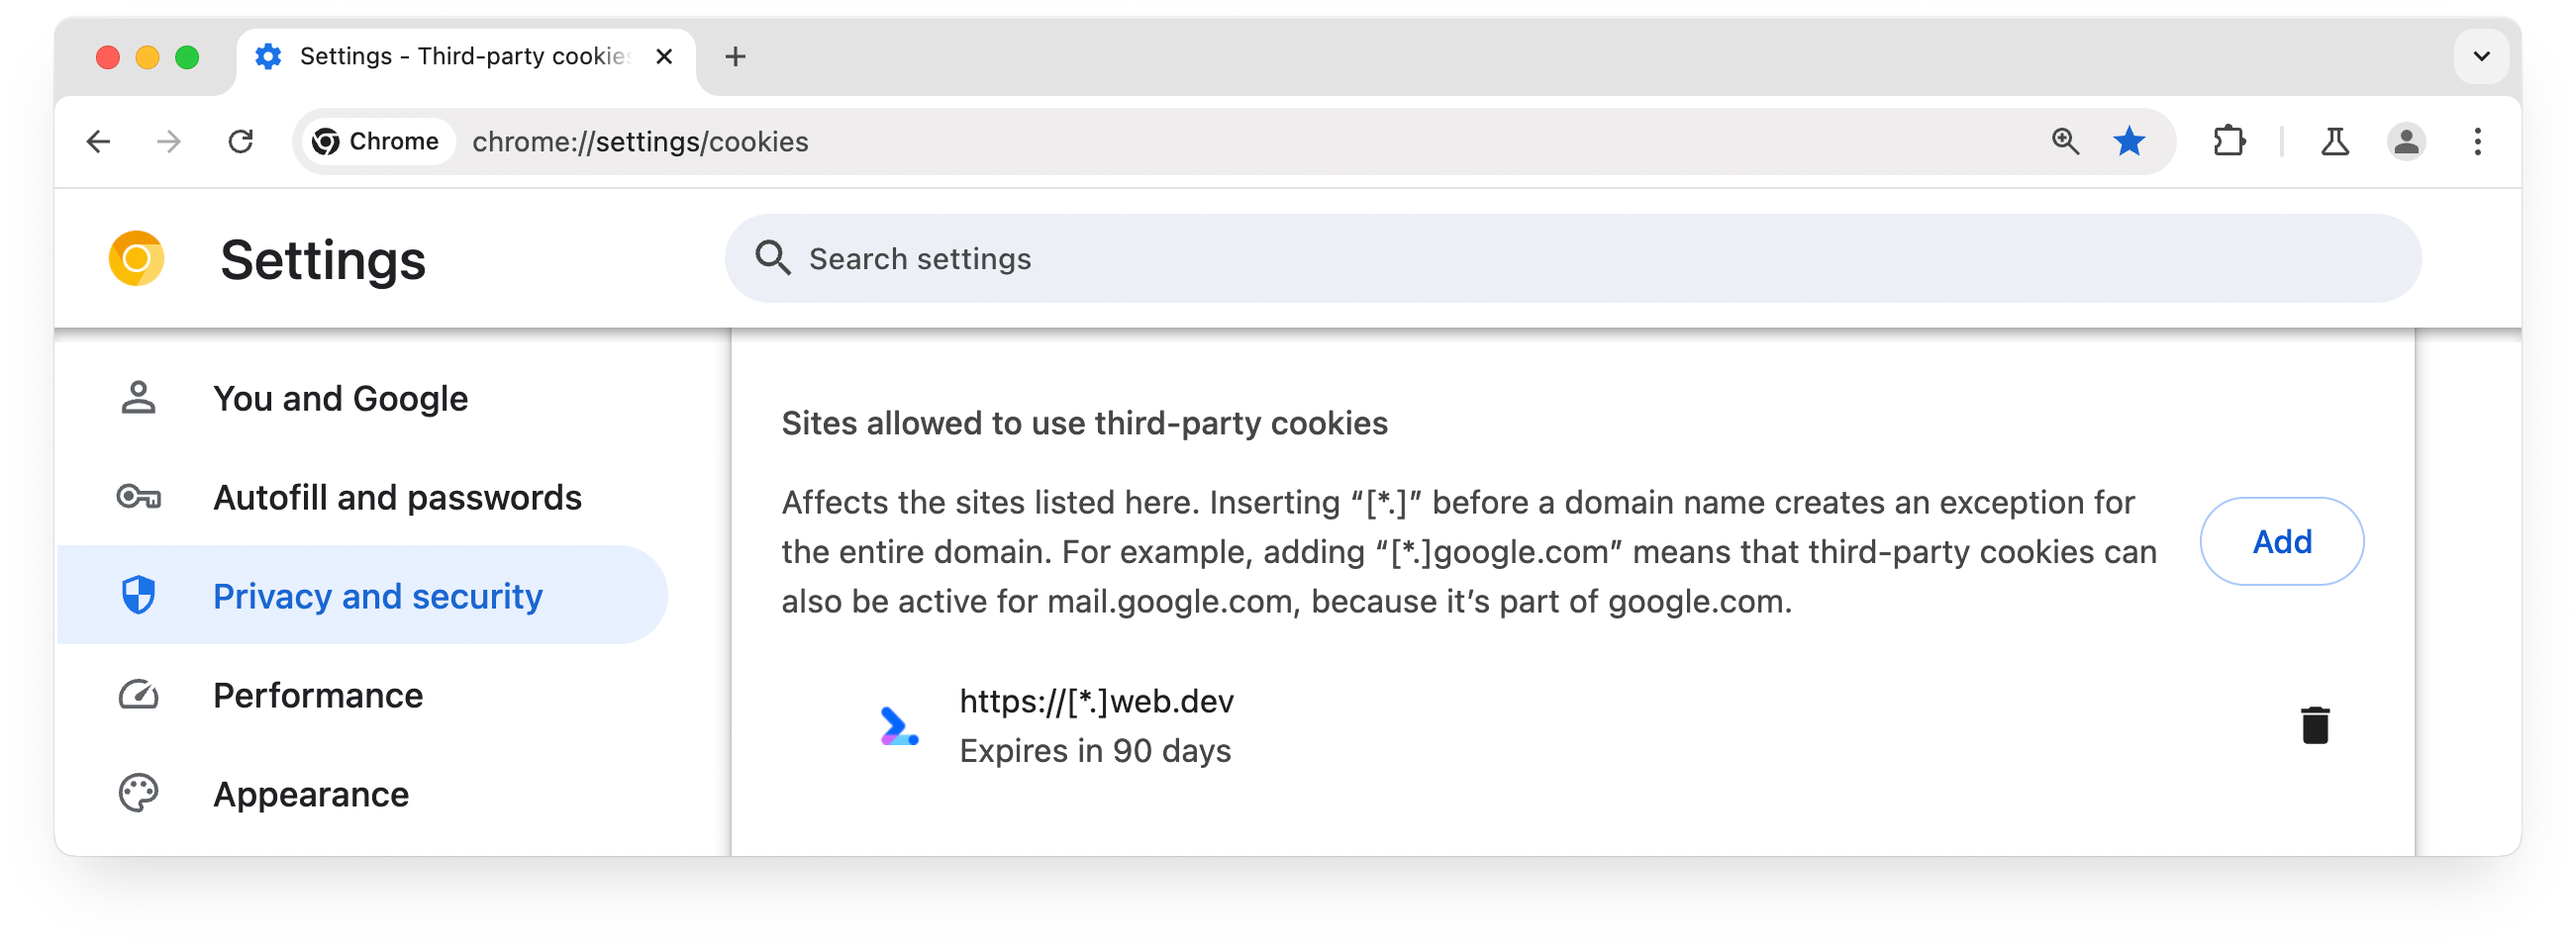 chrome://settings page showing sites allowed to use third-party cookies